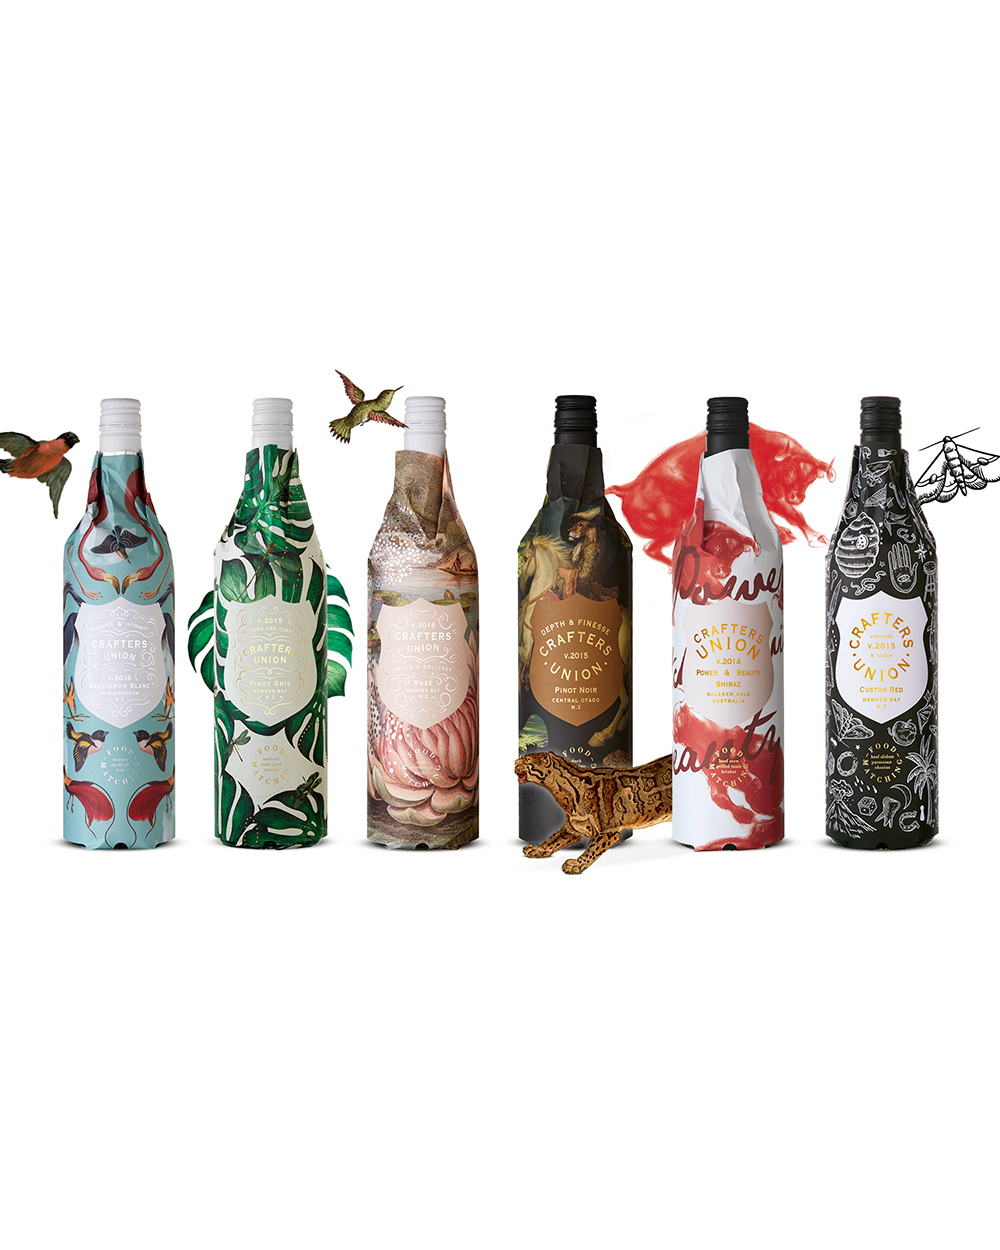 Crafters Union wine range from $21.99 nations wide